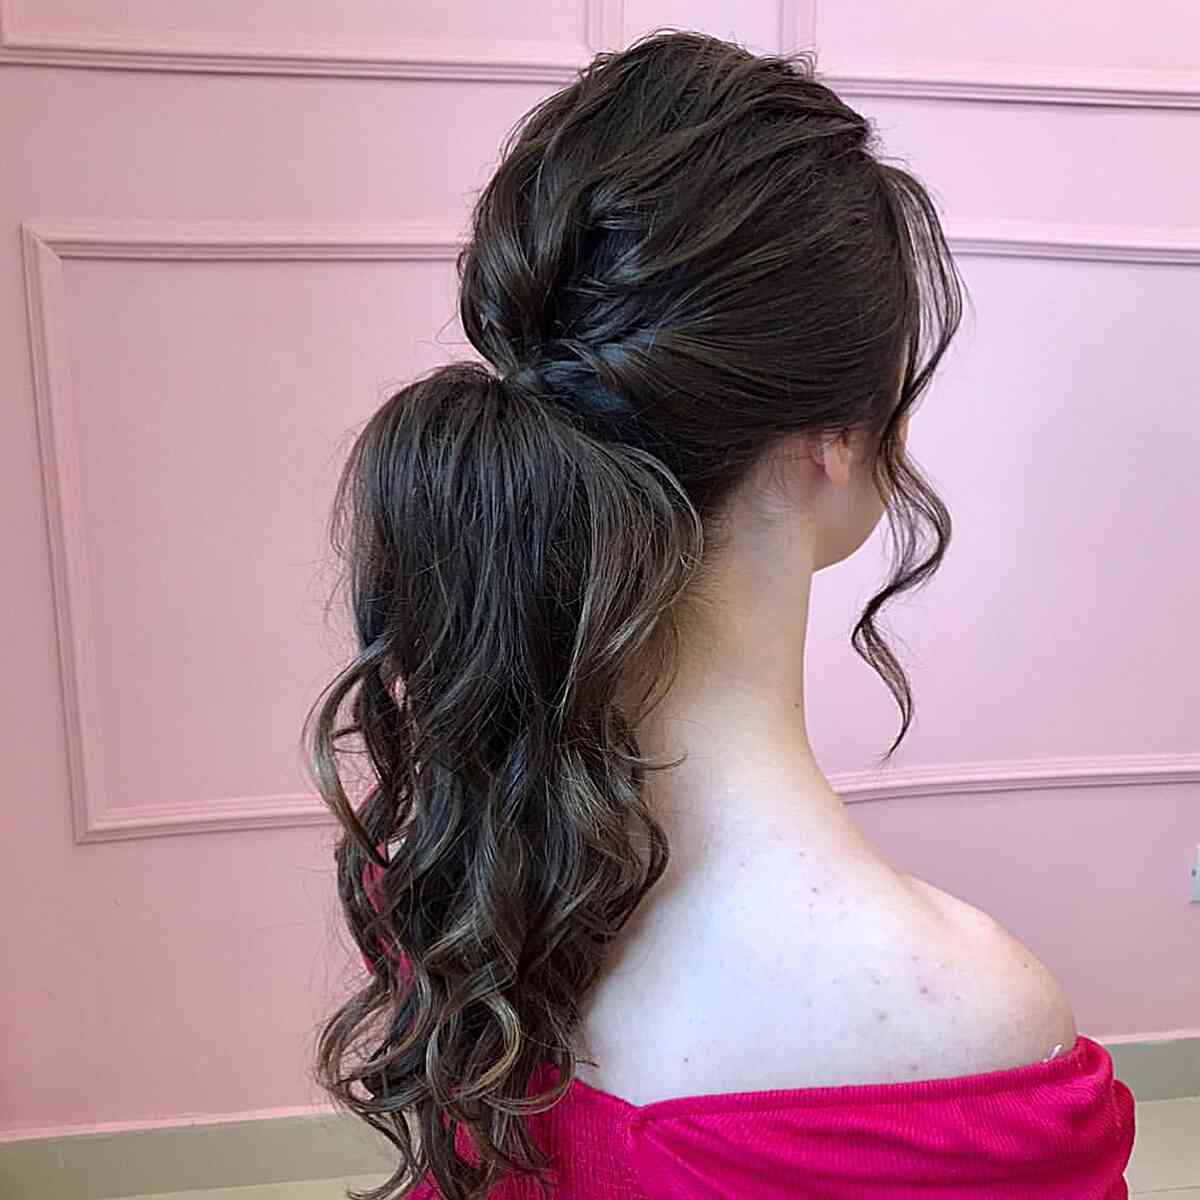 Wavy Textured Ponytail for Prom Night